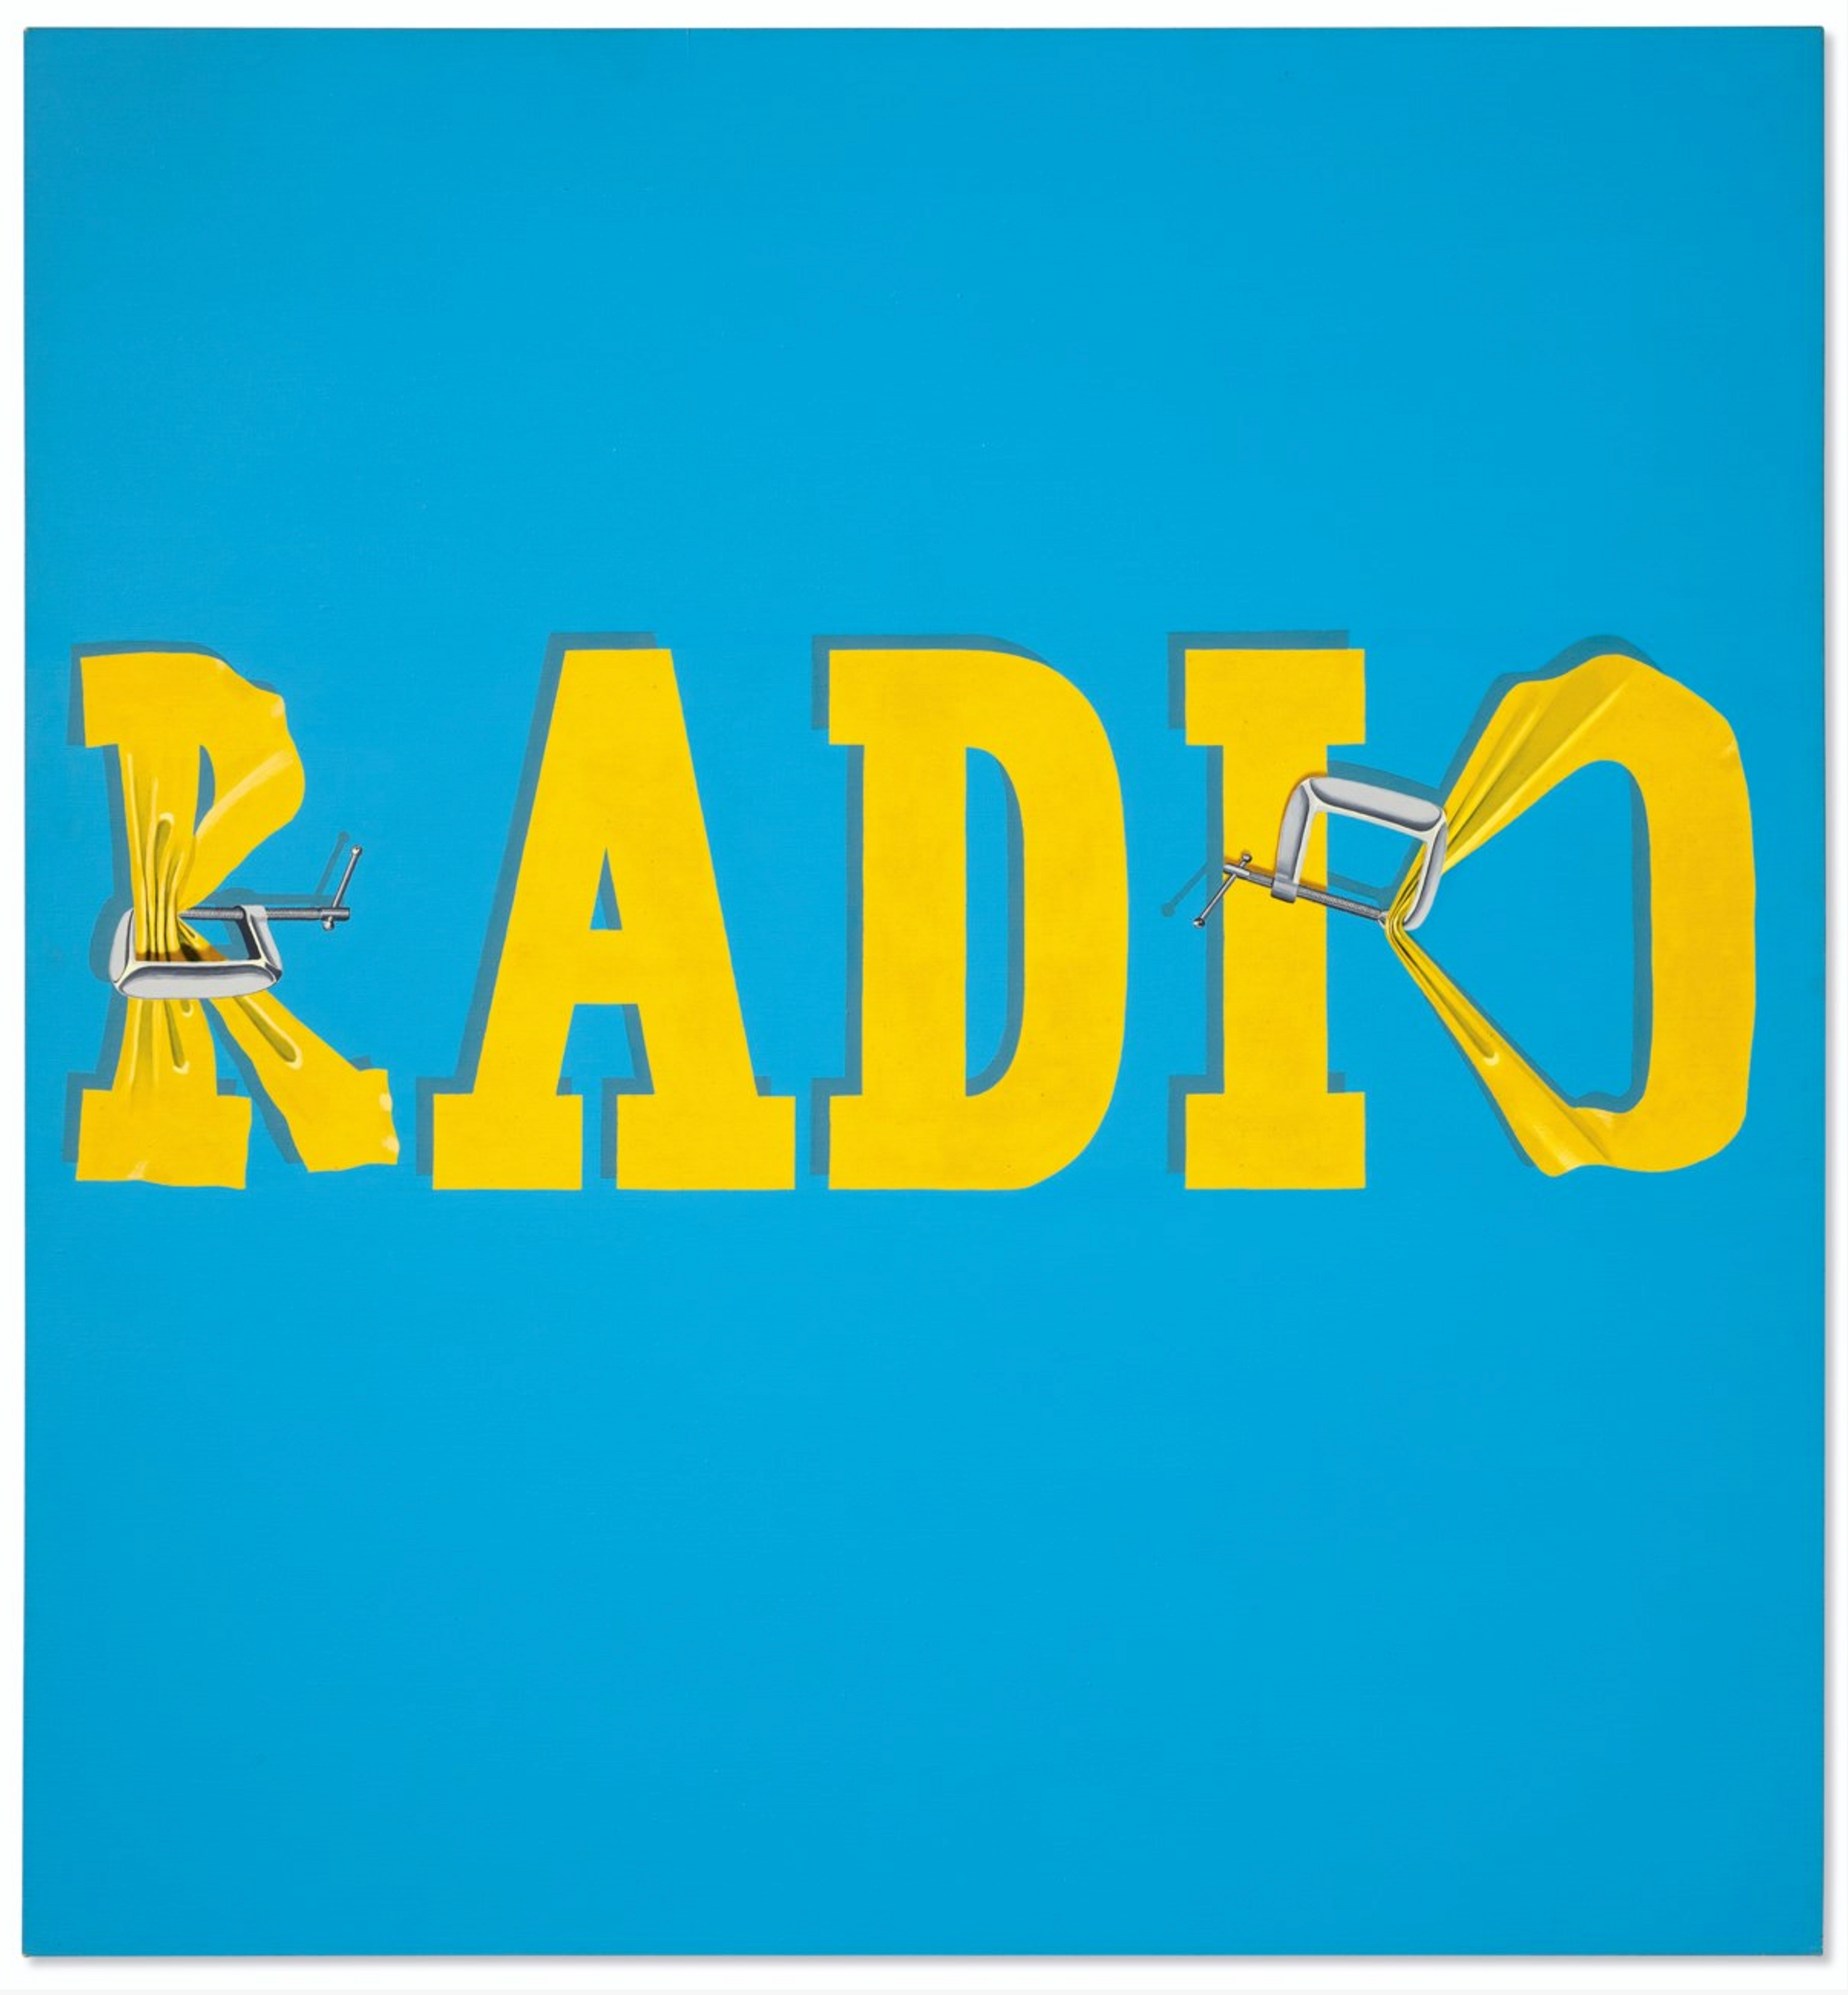 Painting by Ed Ruscha of the word 'radio' in bold yellow lettering against a blue background. The letters 'r' and 'o' are distorted as they are clamped.